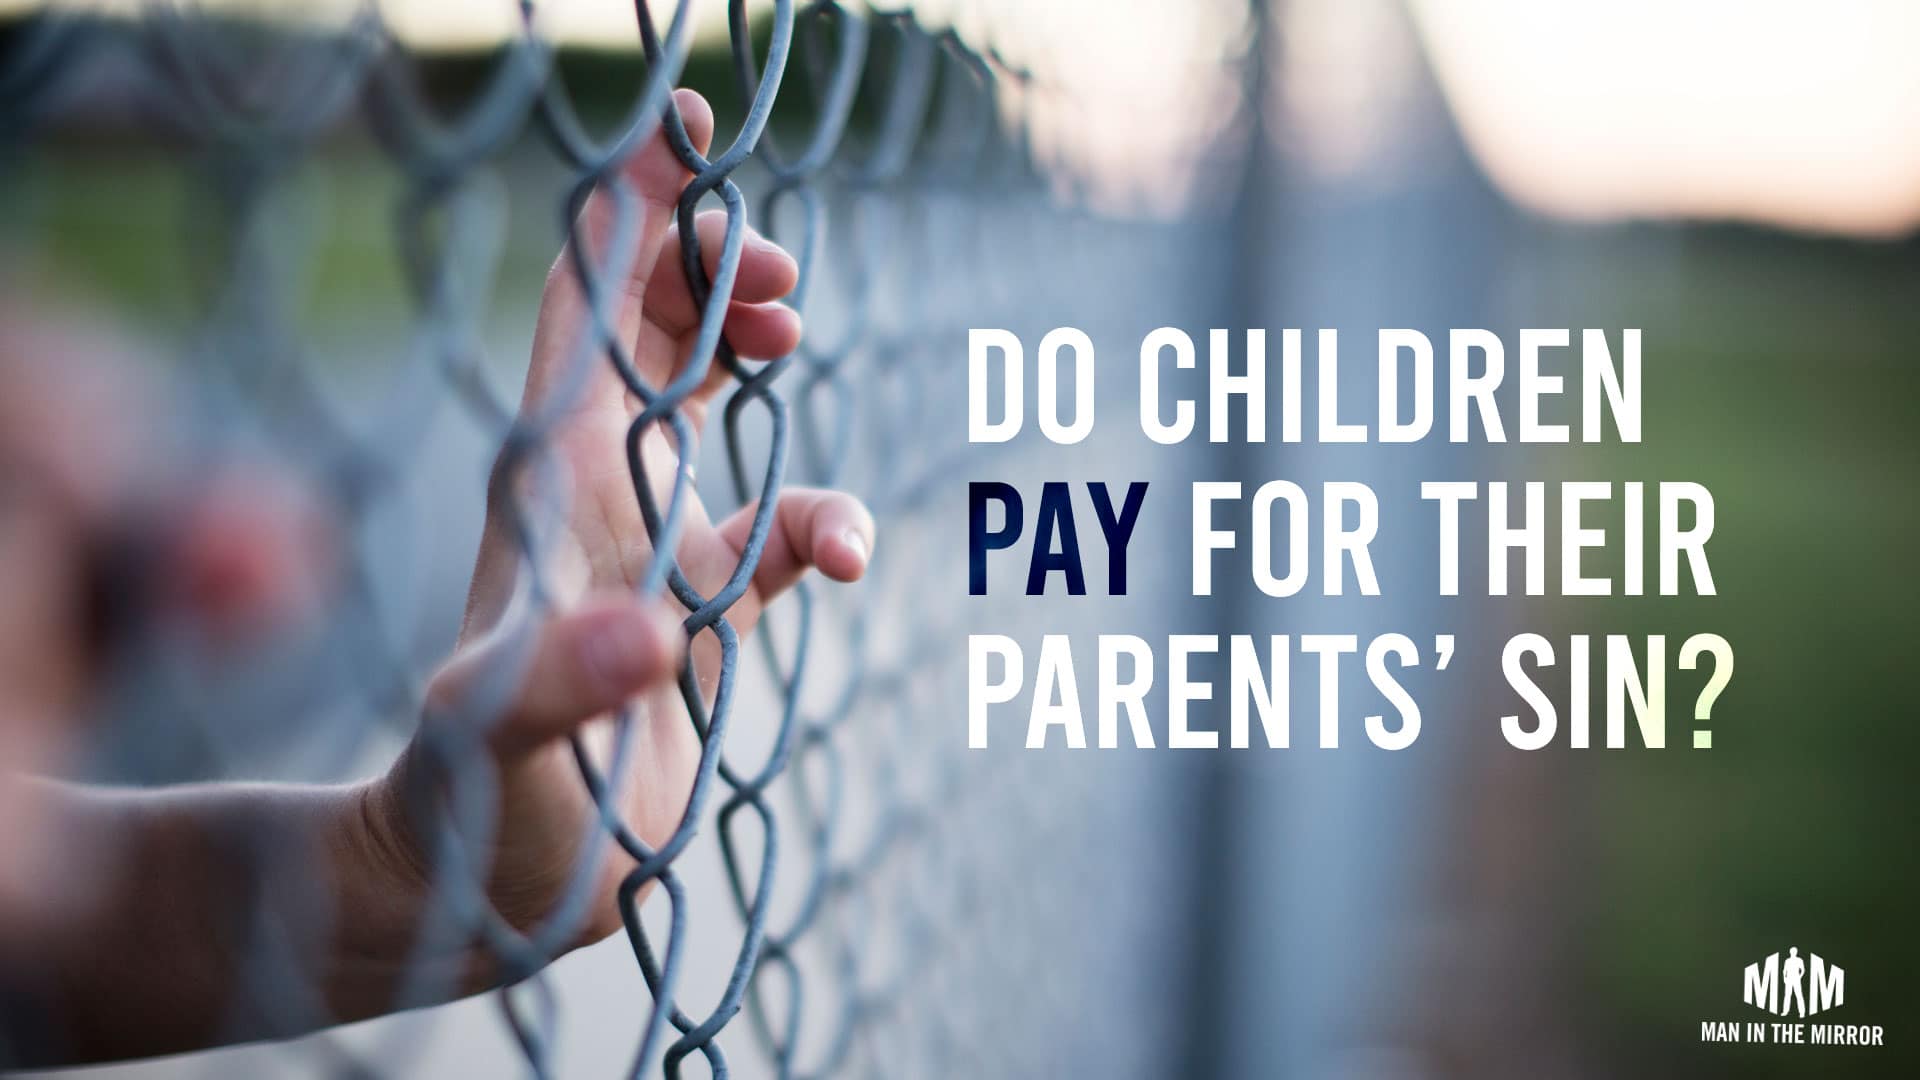 Do children pay for their parents' sin?